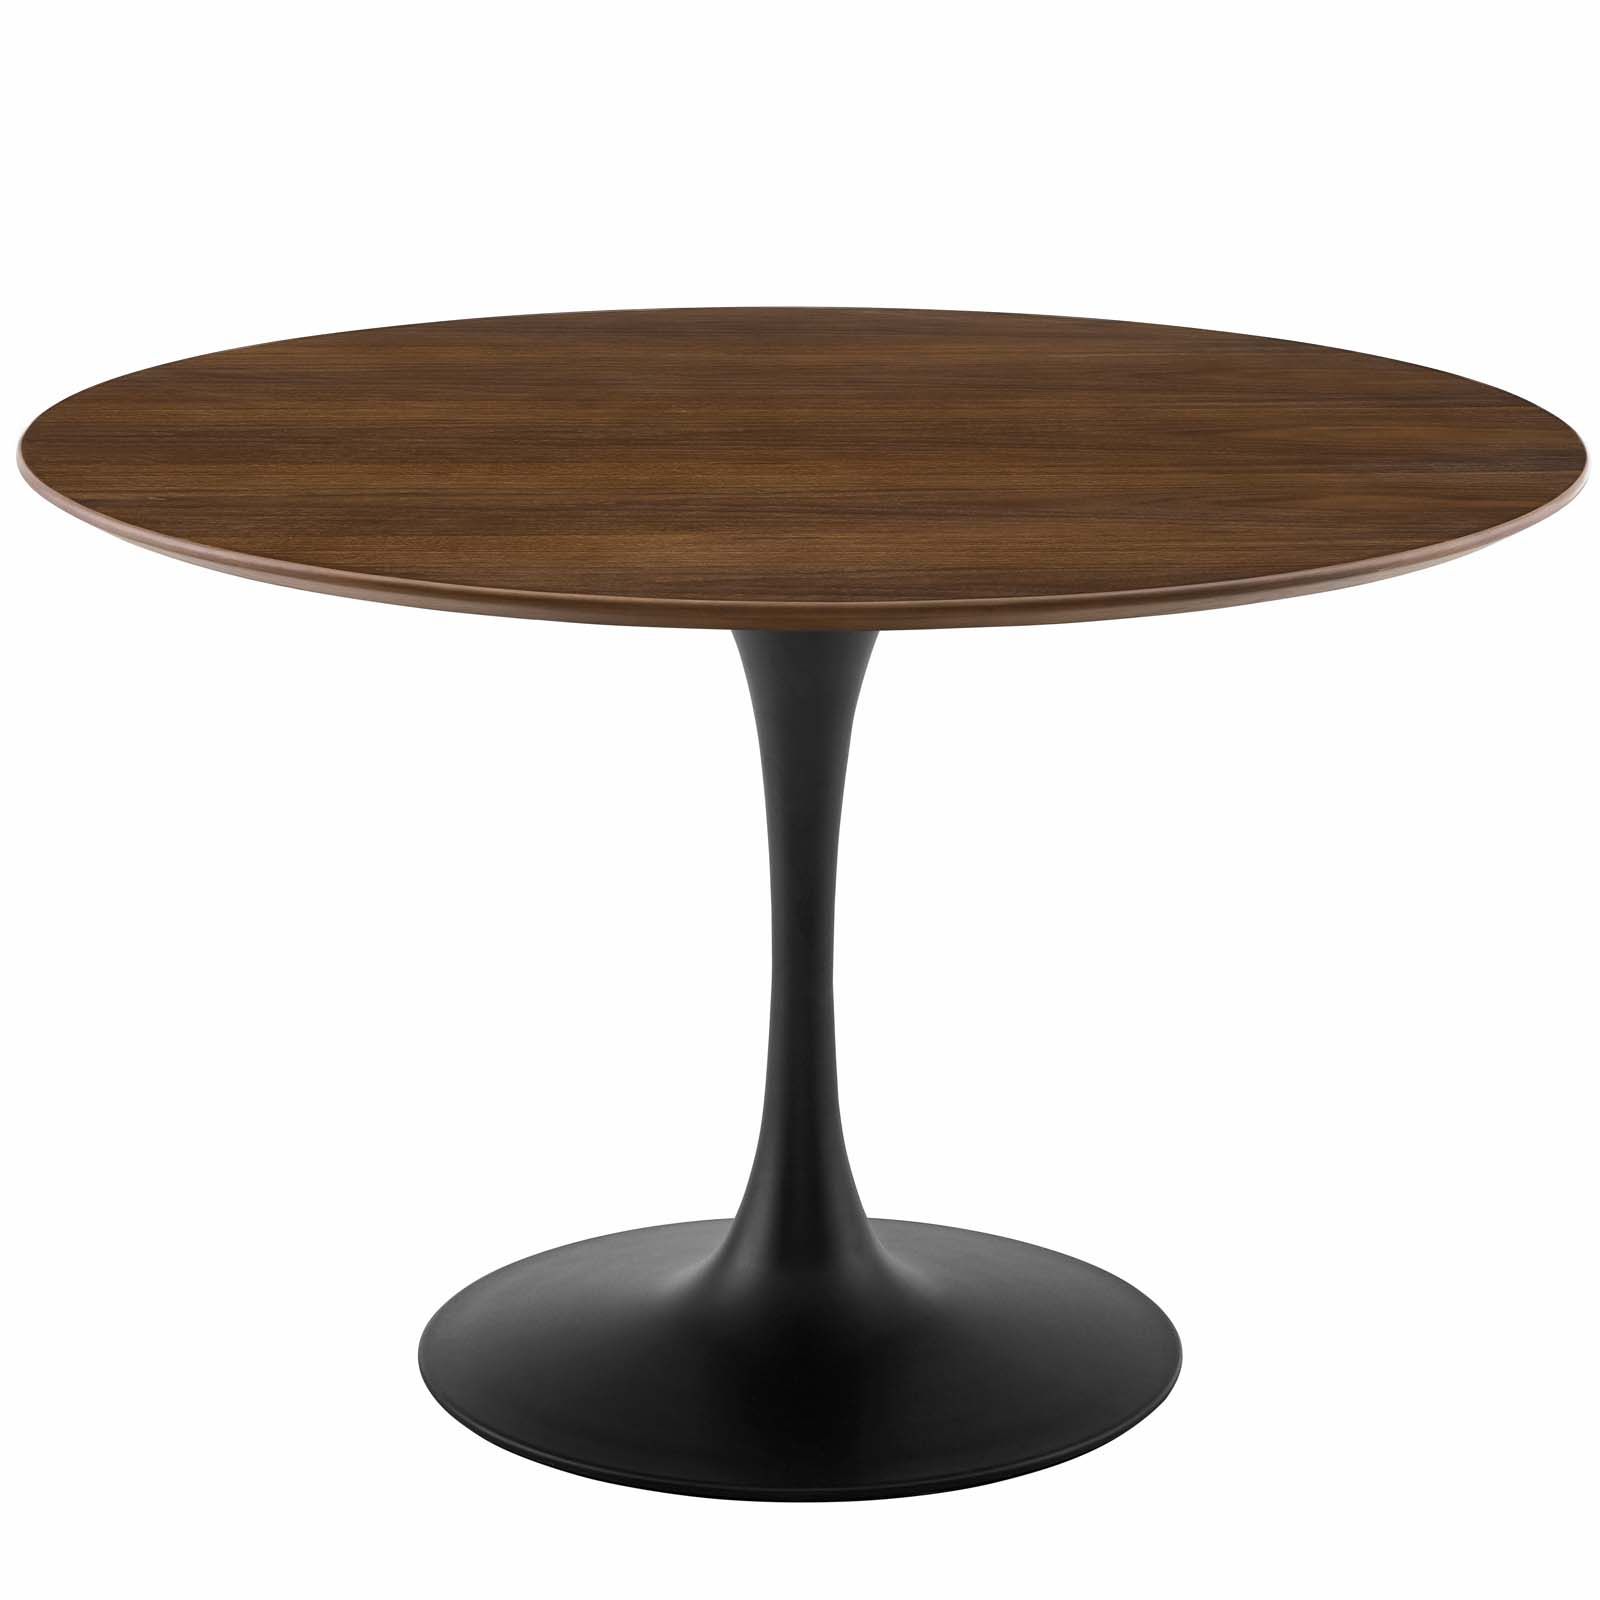 Lippa 47" Round Walnut Dining Table Throughout Preferred Walnut Tove Dining Tables (View 15 of 20)